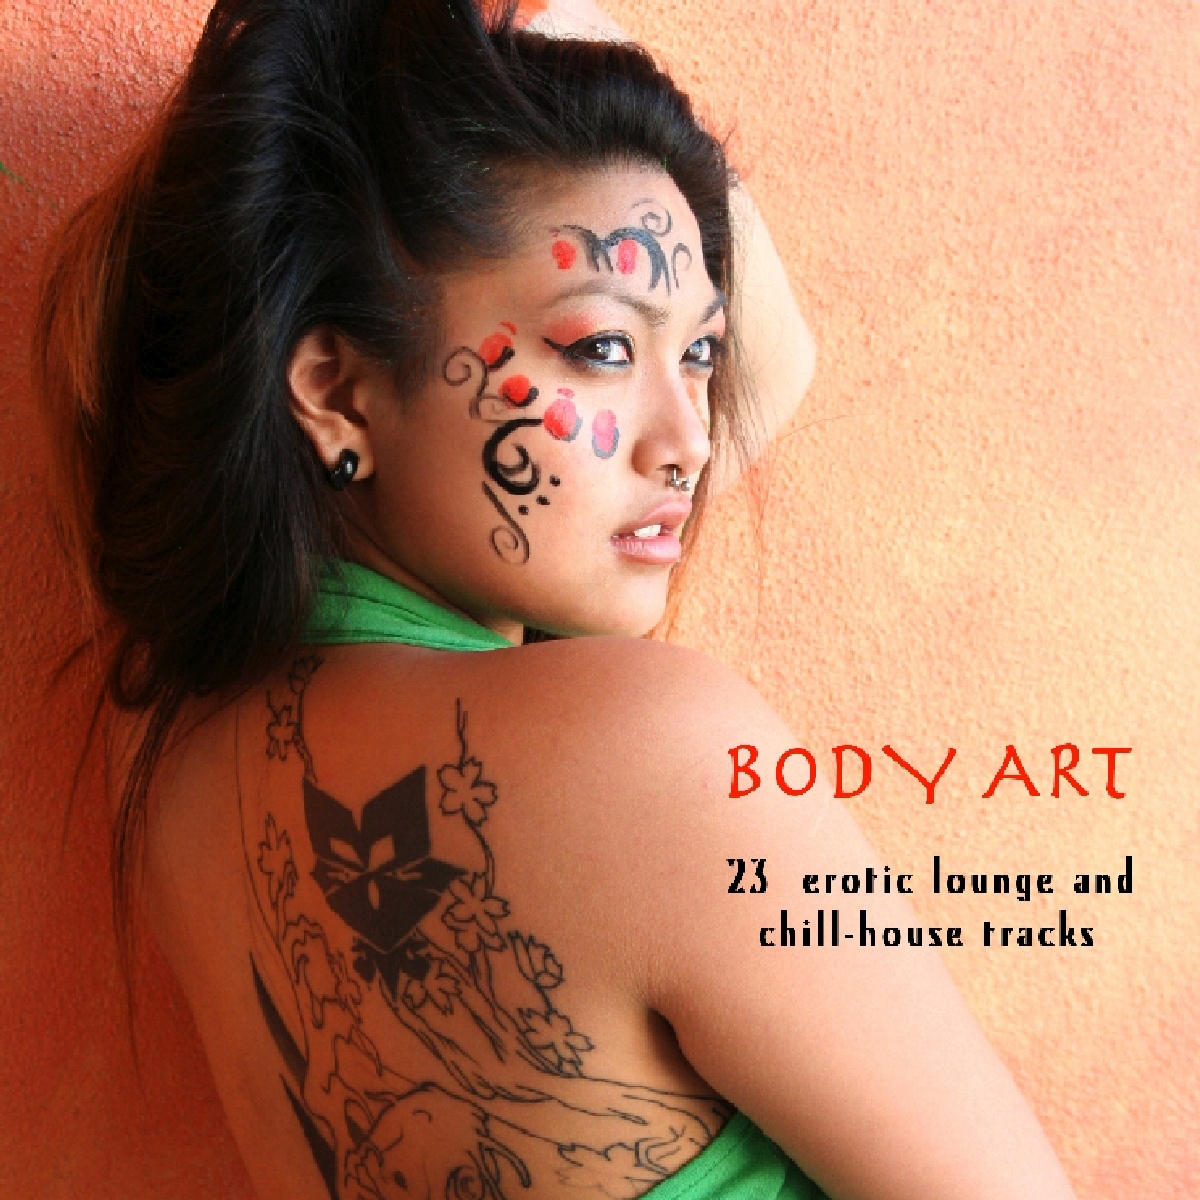 Body Art (23 erotic lounge and chill-house tracks)